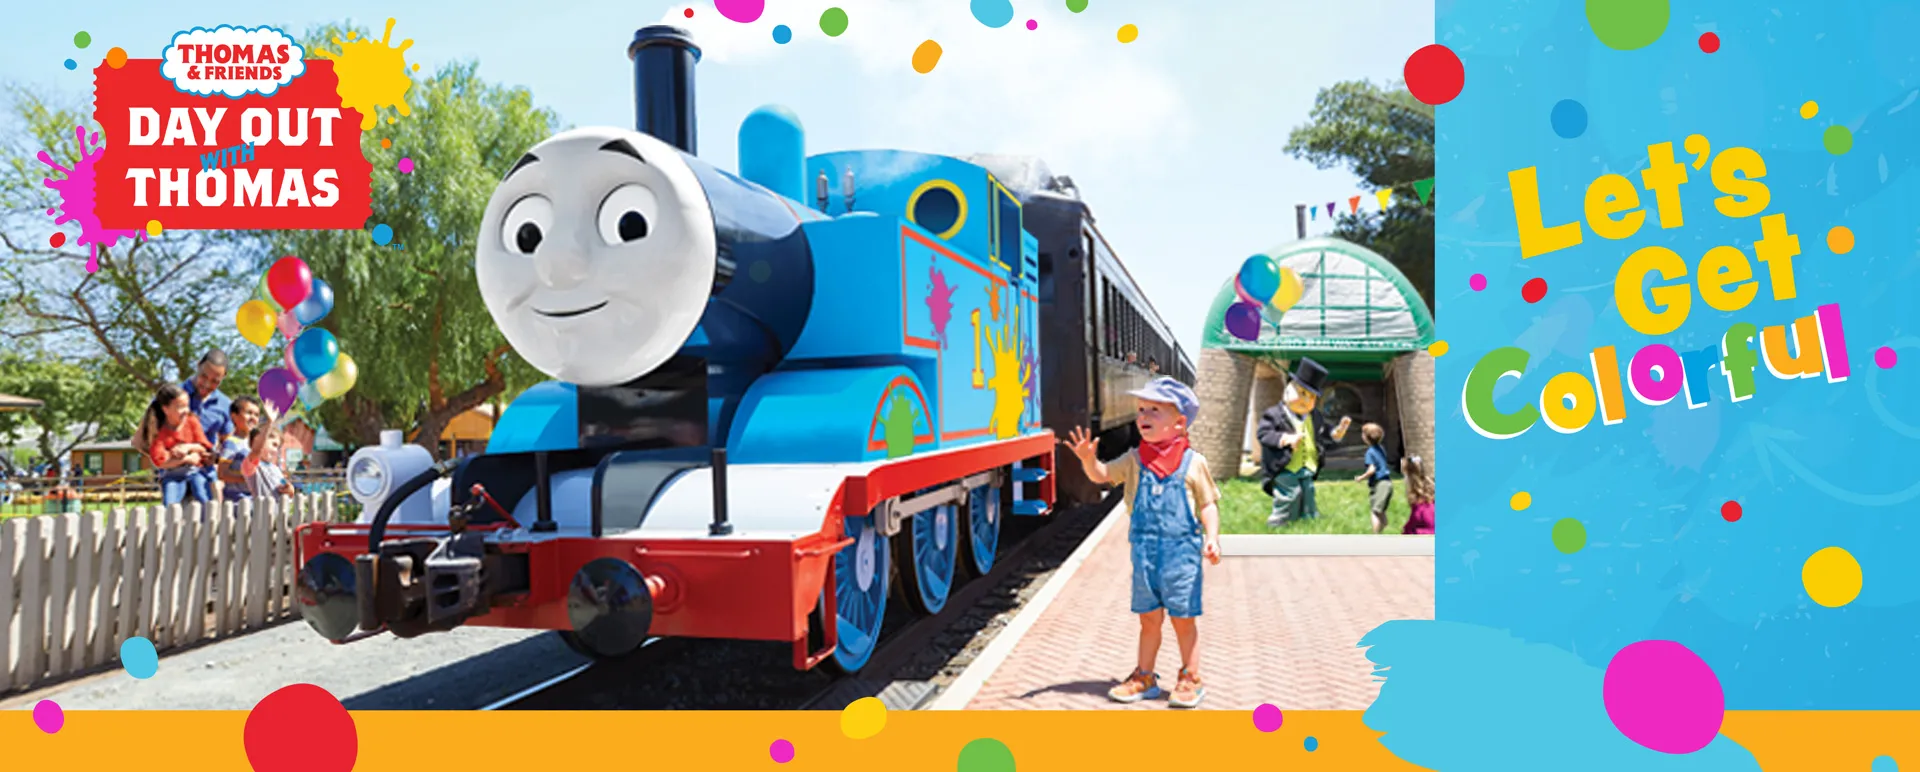 Day Out with Thomas Train Ride - Play & Stay All Day!